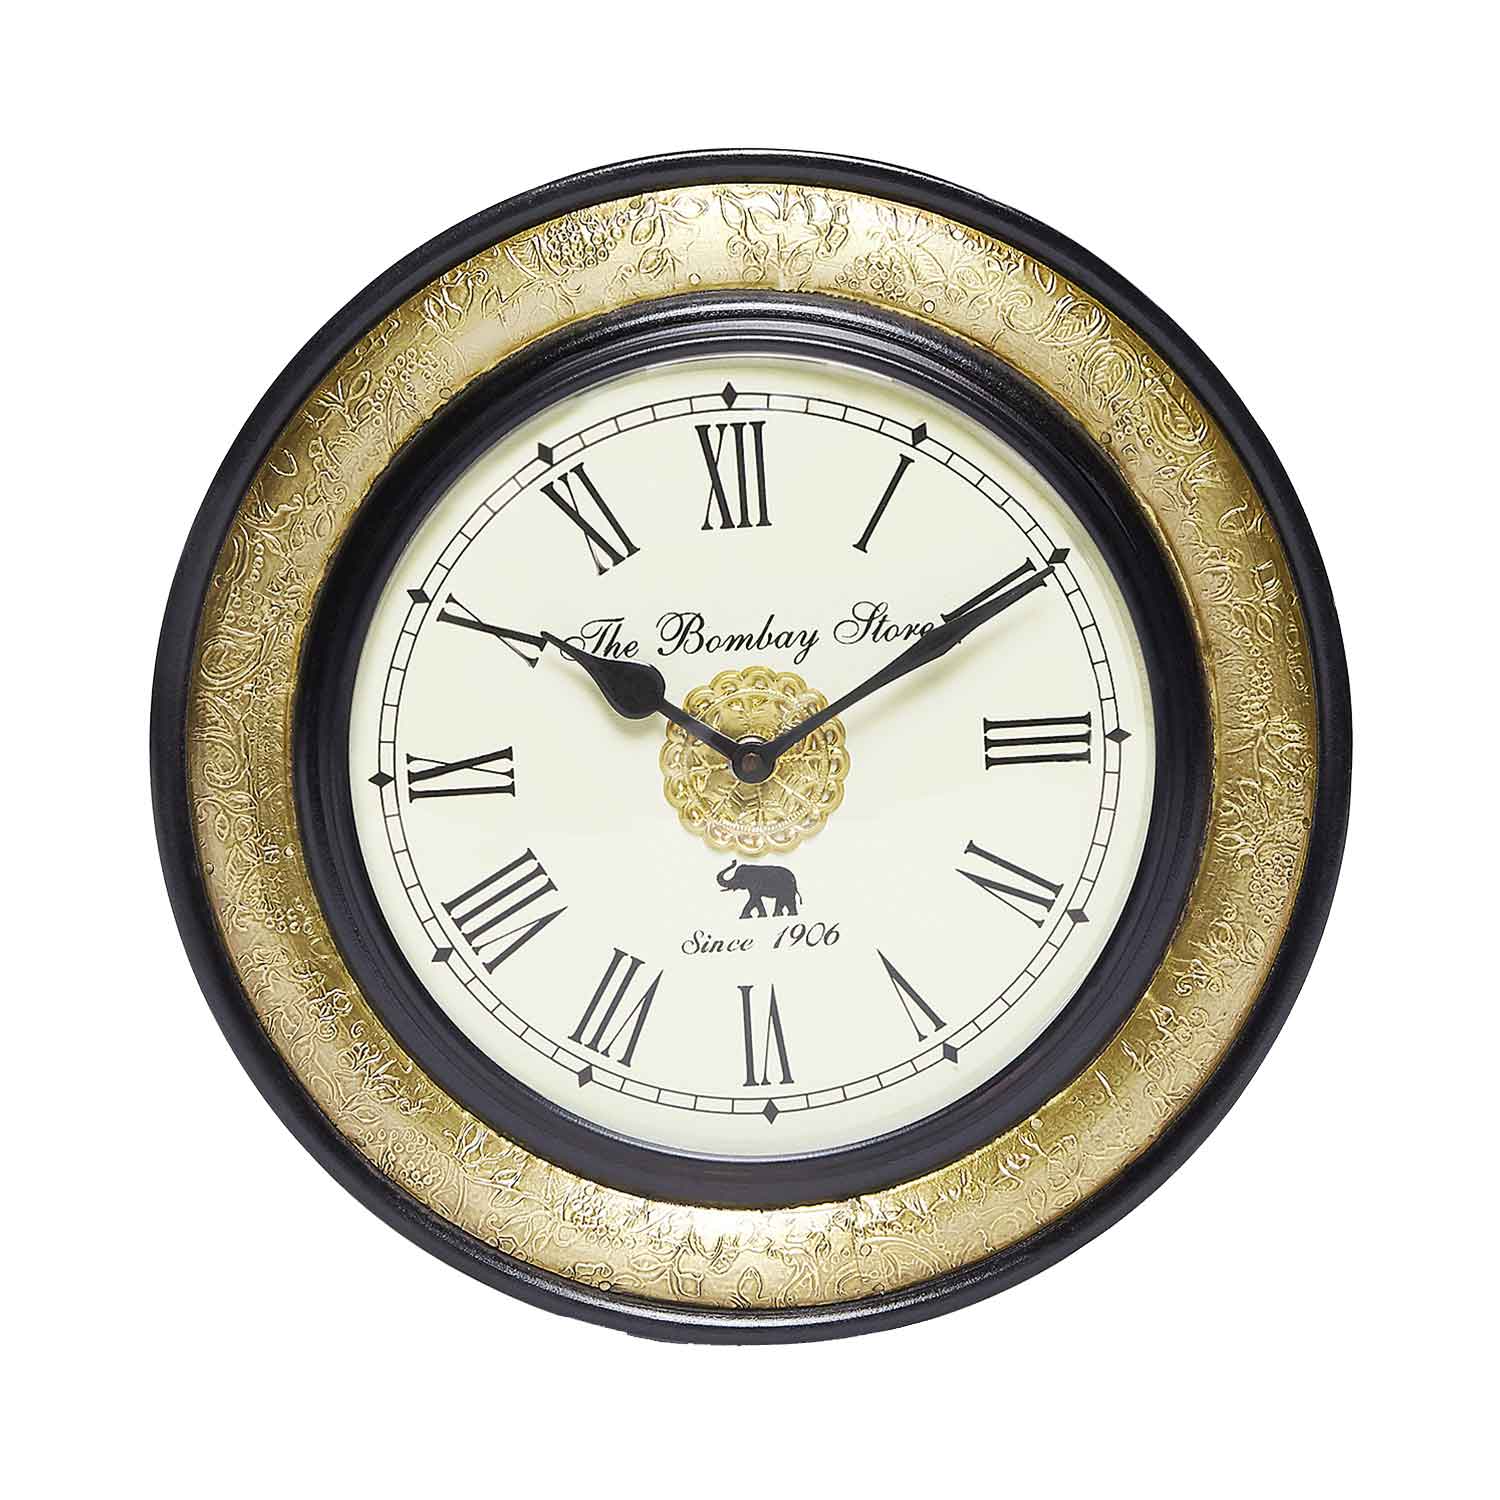 The Bombay Store Wooden Vintage Wall Clock with Brass Floral Engraving